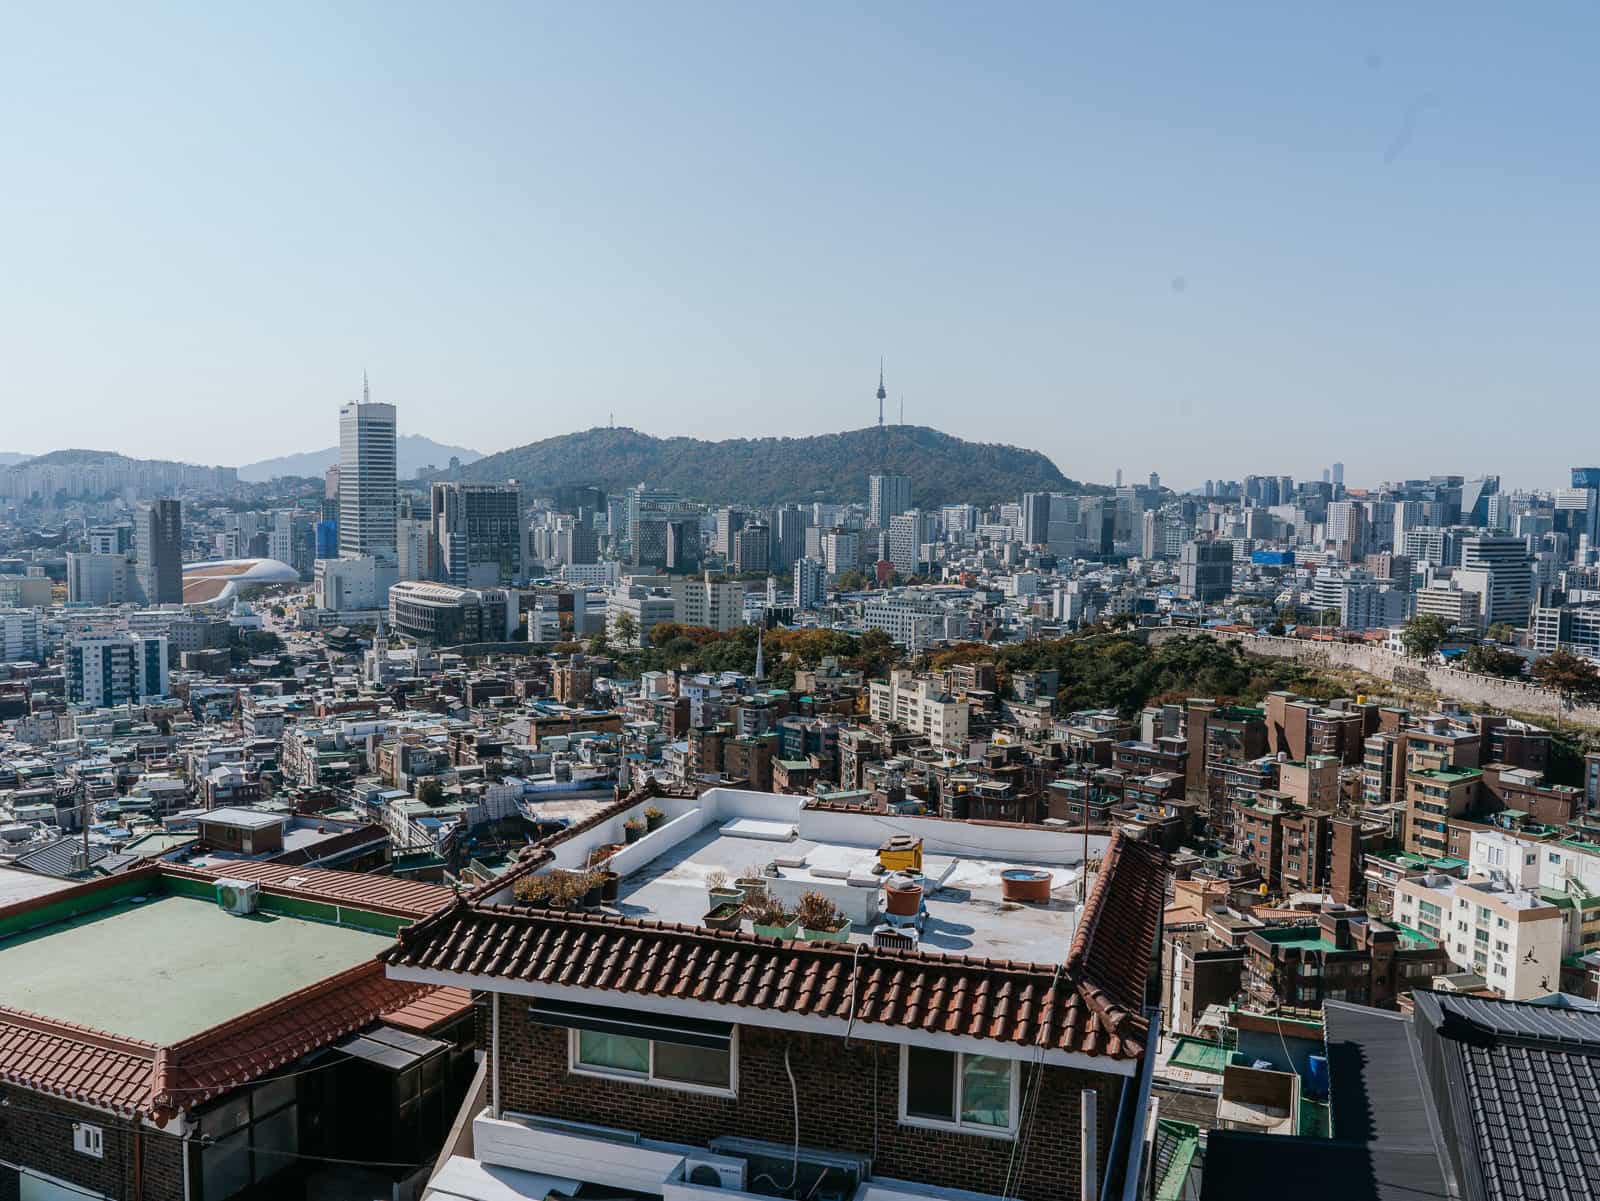 View of Changsin-dong in Seoul